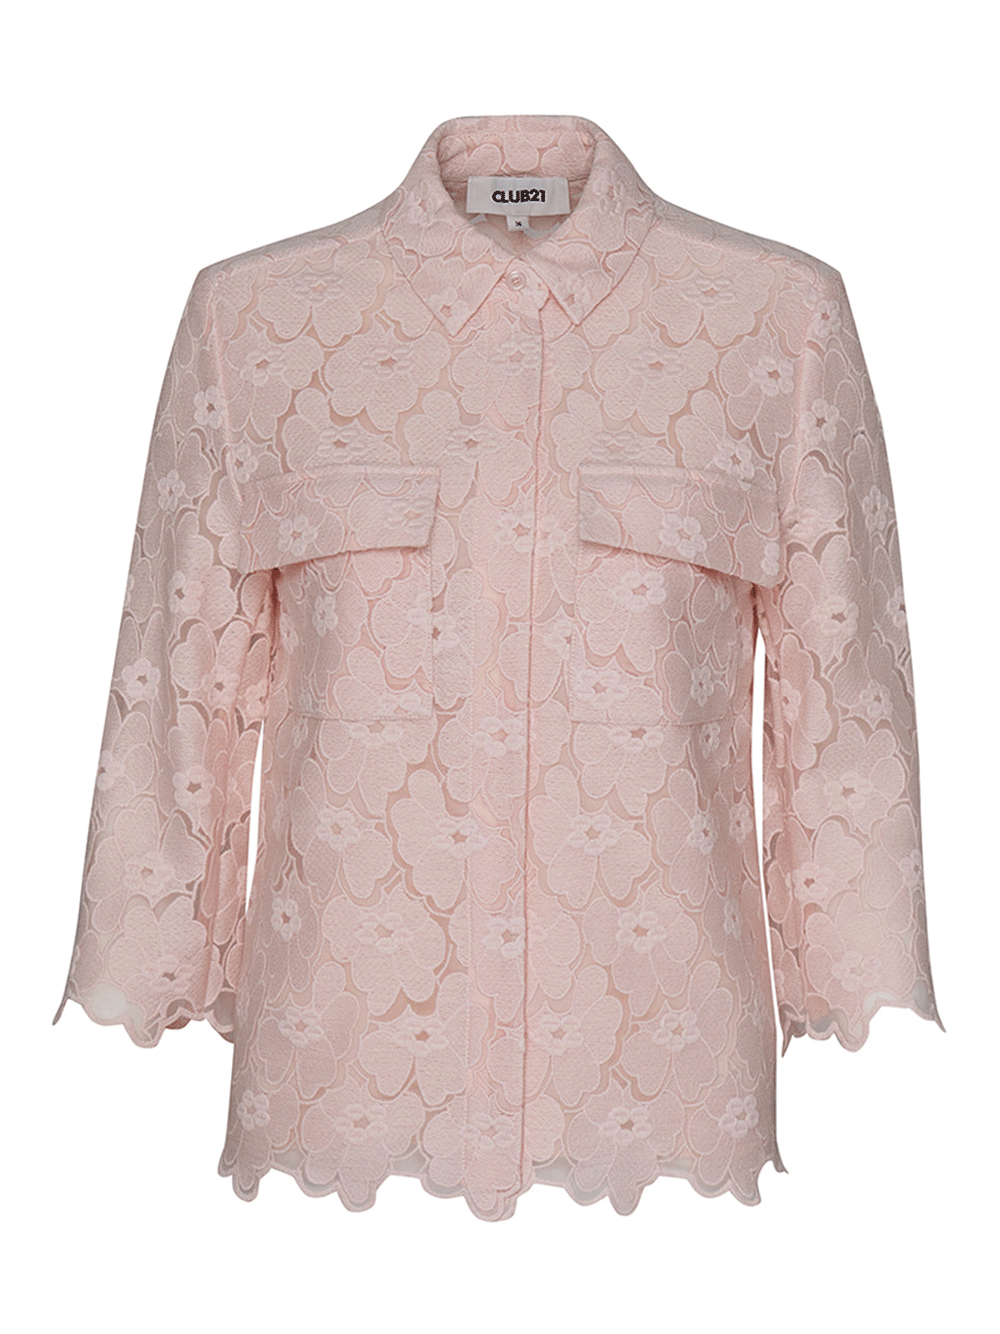 Club21-Collection-Floral-Lace-Patch-Shirt-Ivory-1